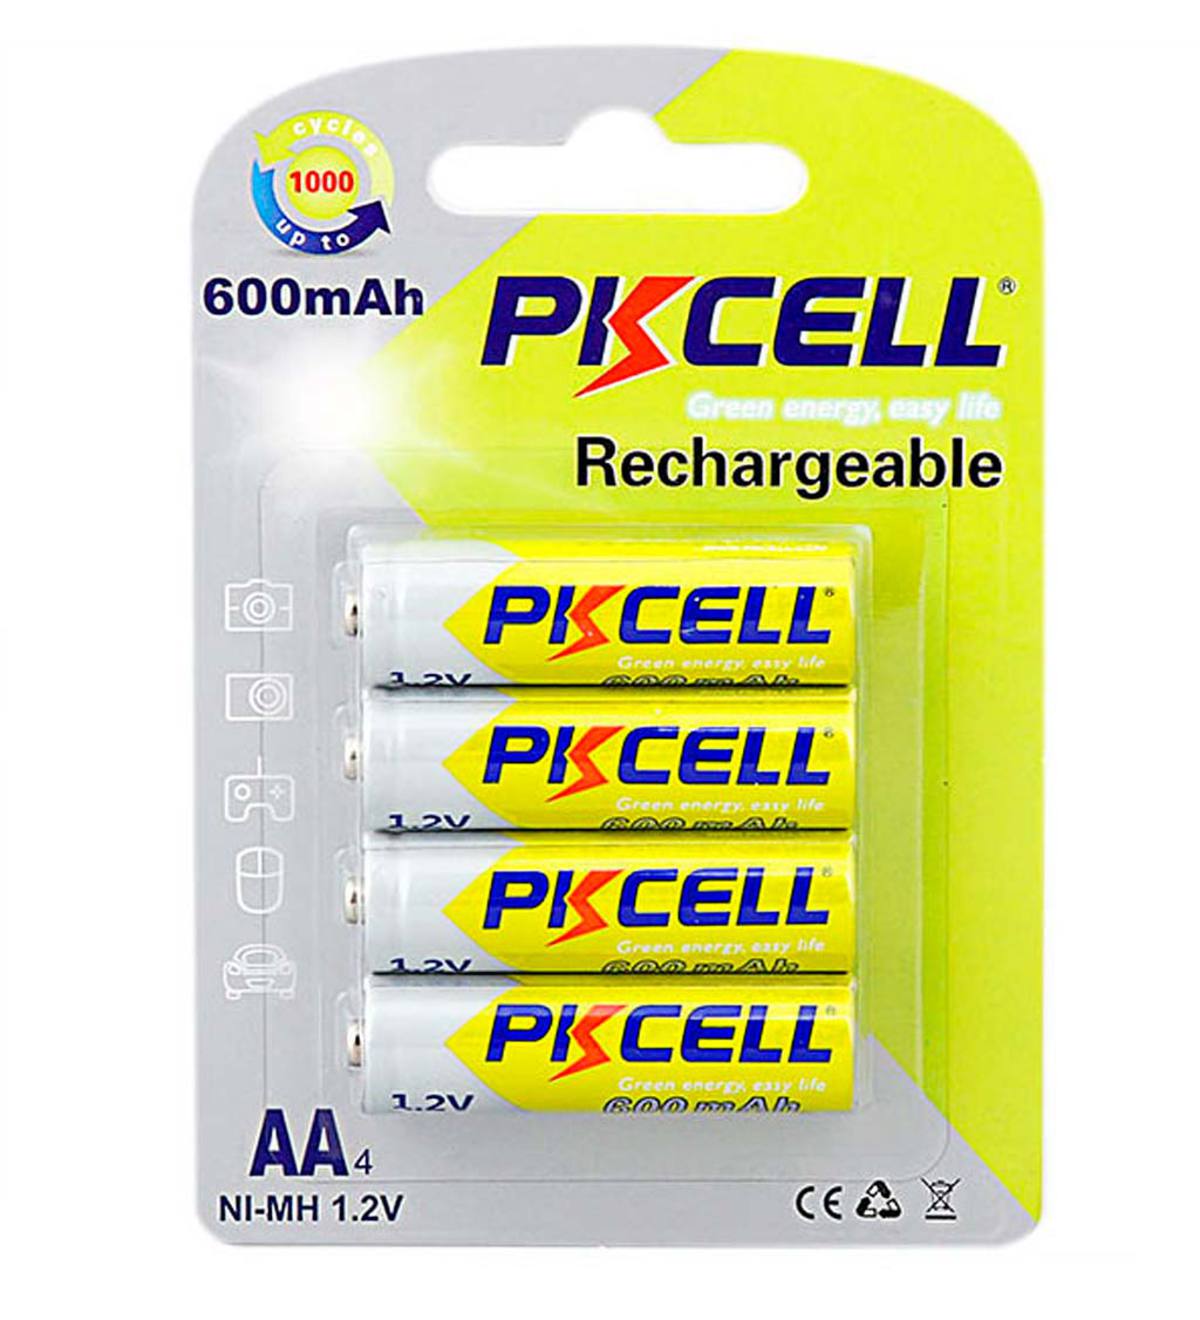 Rechargeable AA Batteries, Pack of 4